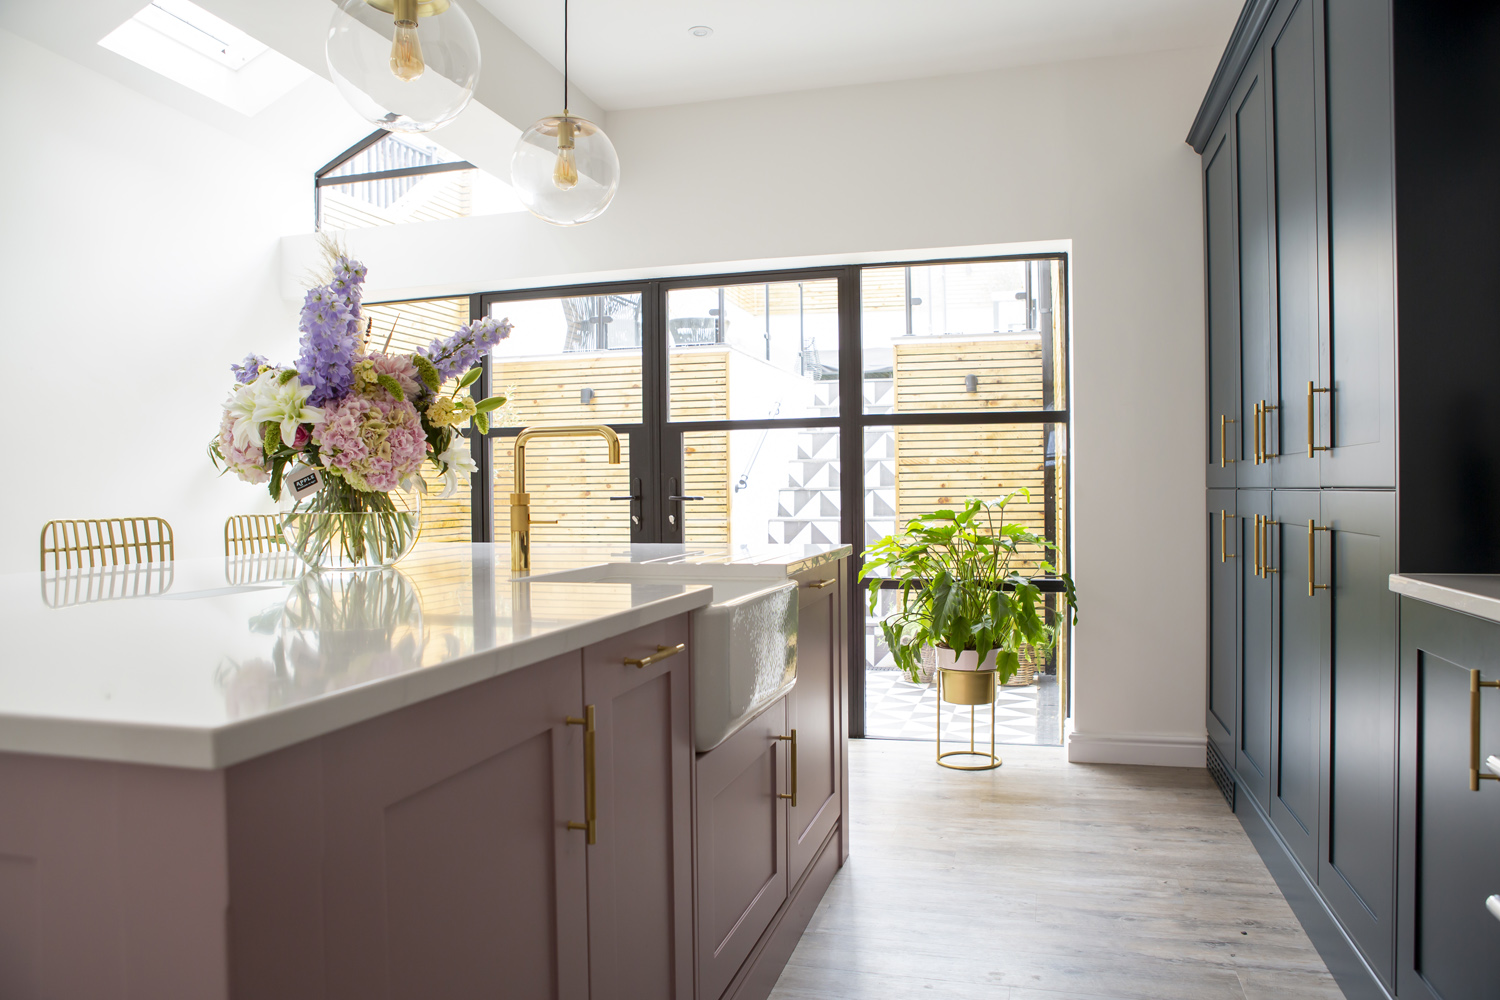 Stoneham Kitchen with a dusky pink kitchen island and dark blue cabinets looking out to a beautiful garden